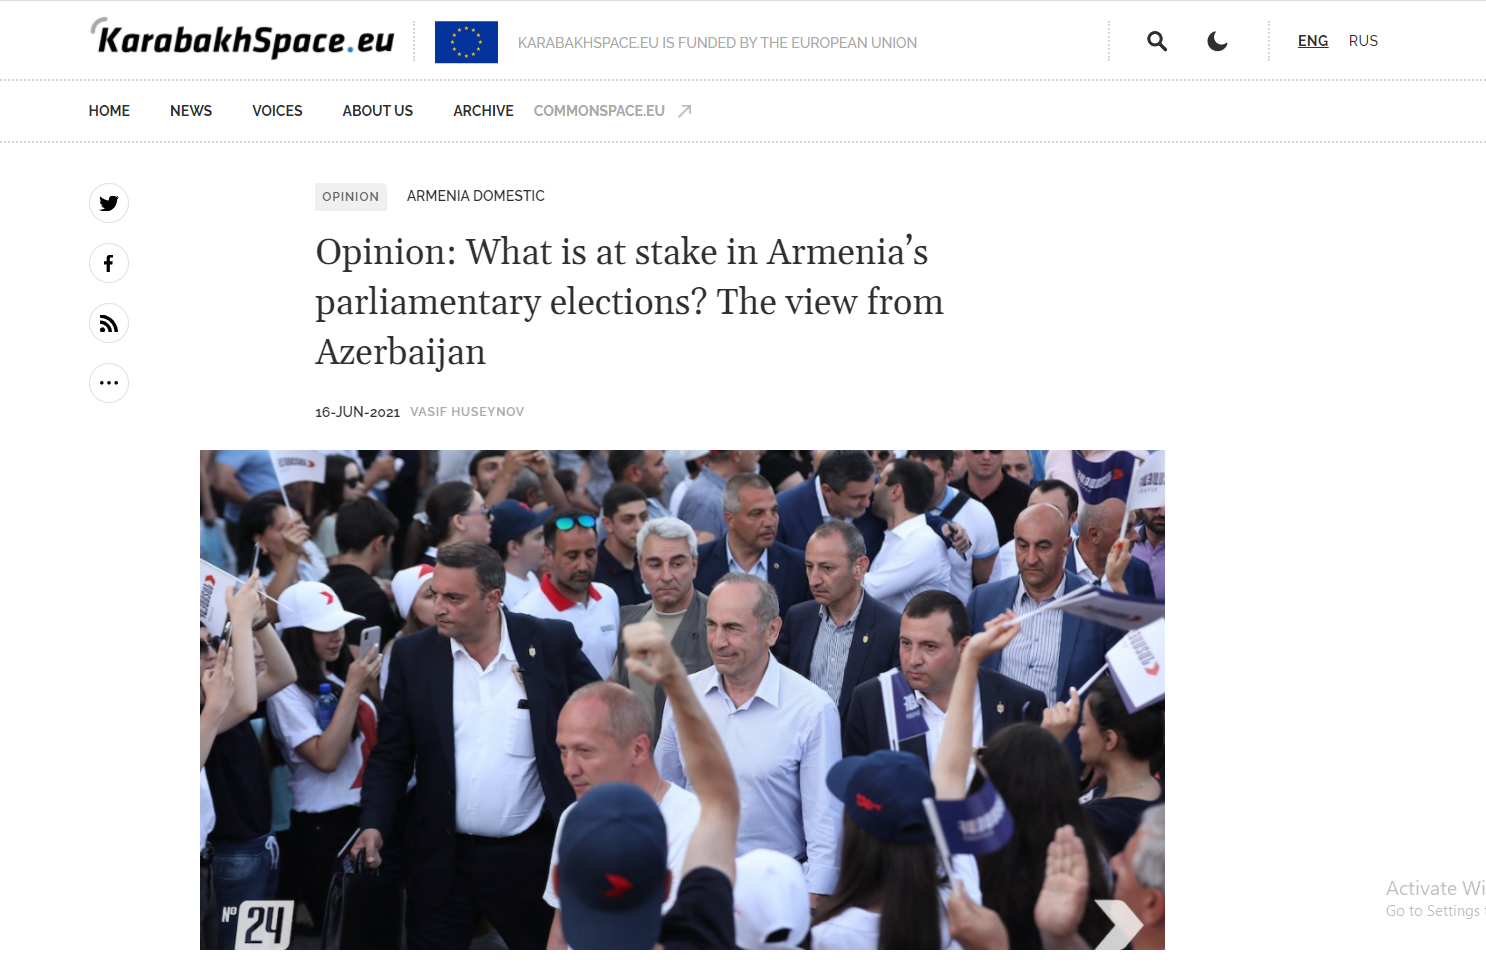 Opinion: What is at stake in Armenia’s parliamentary elections? The view from Azerbaijan